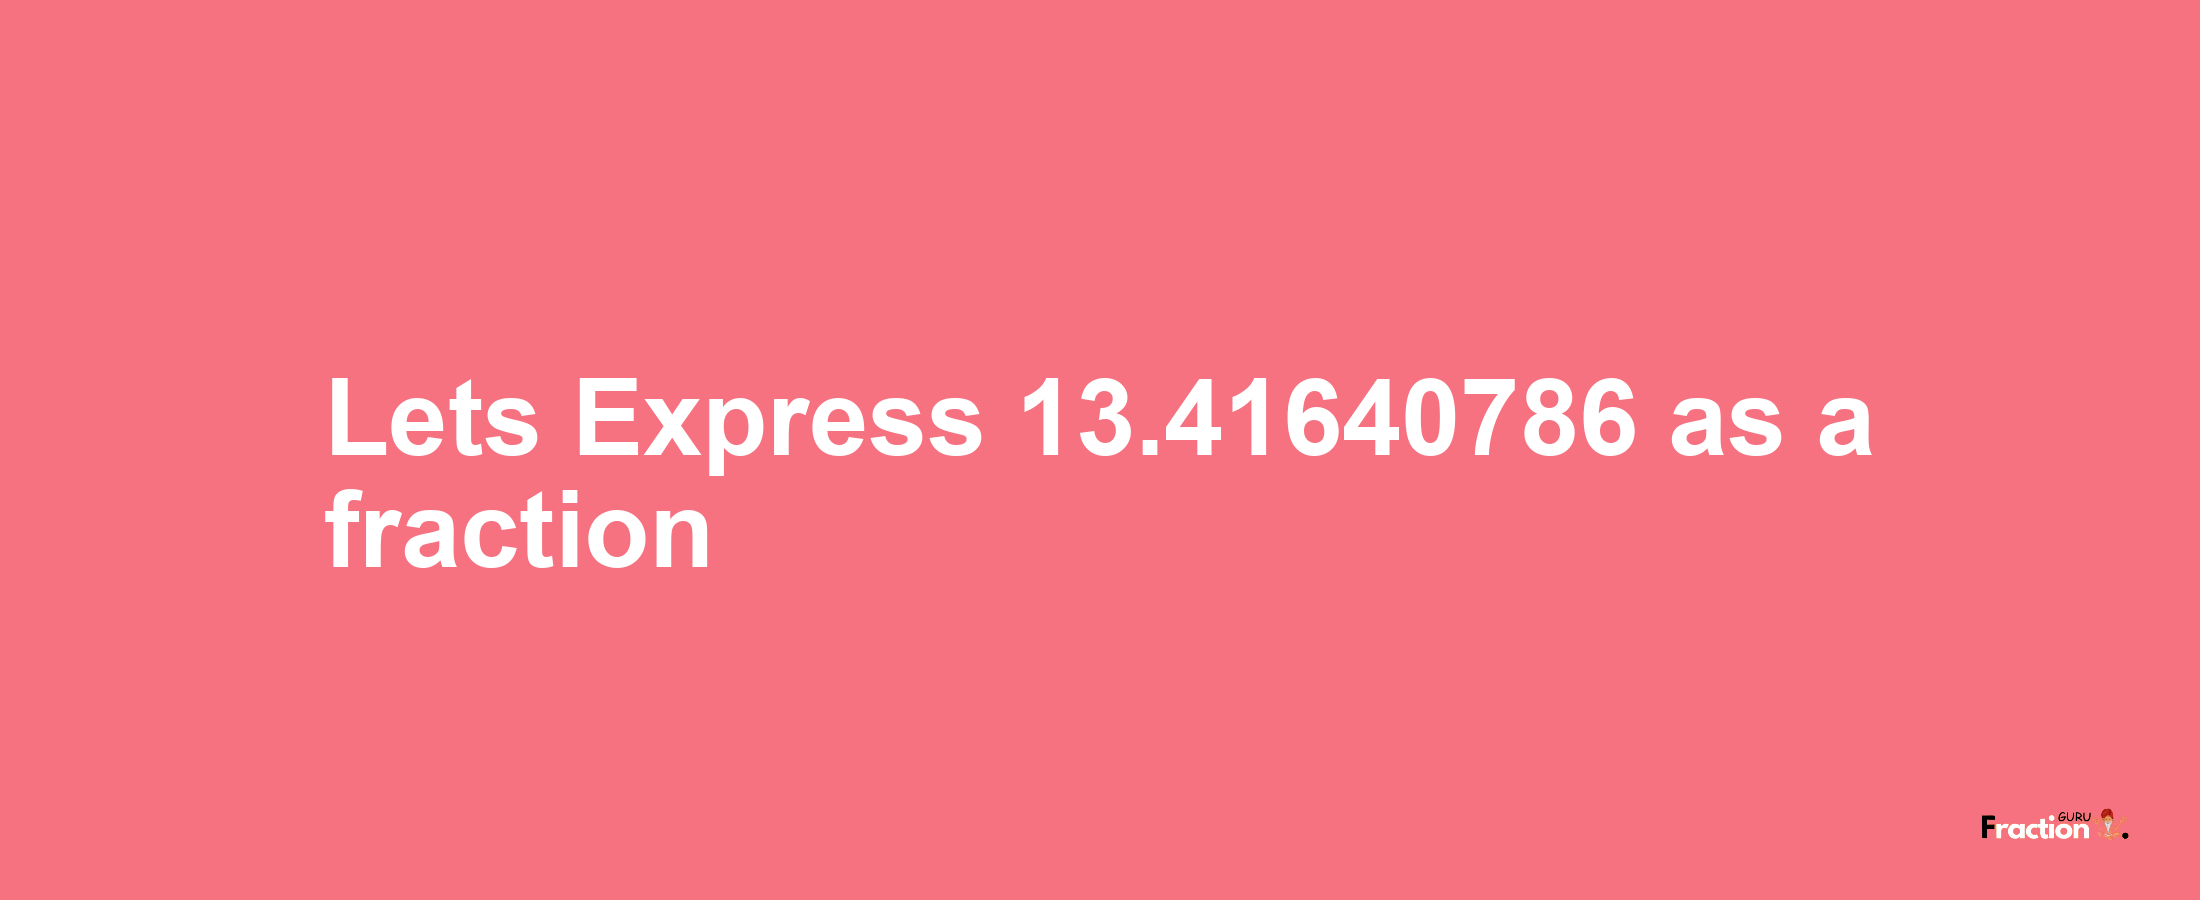 Lets Express 13.41640786 as afraction